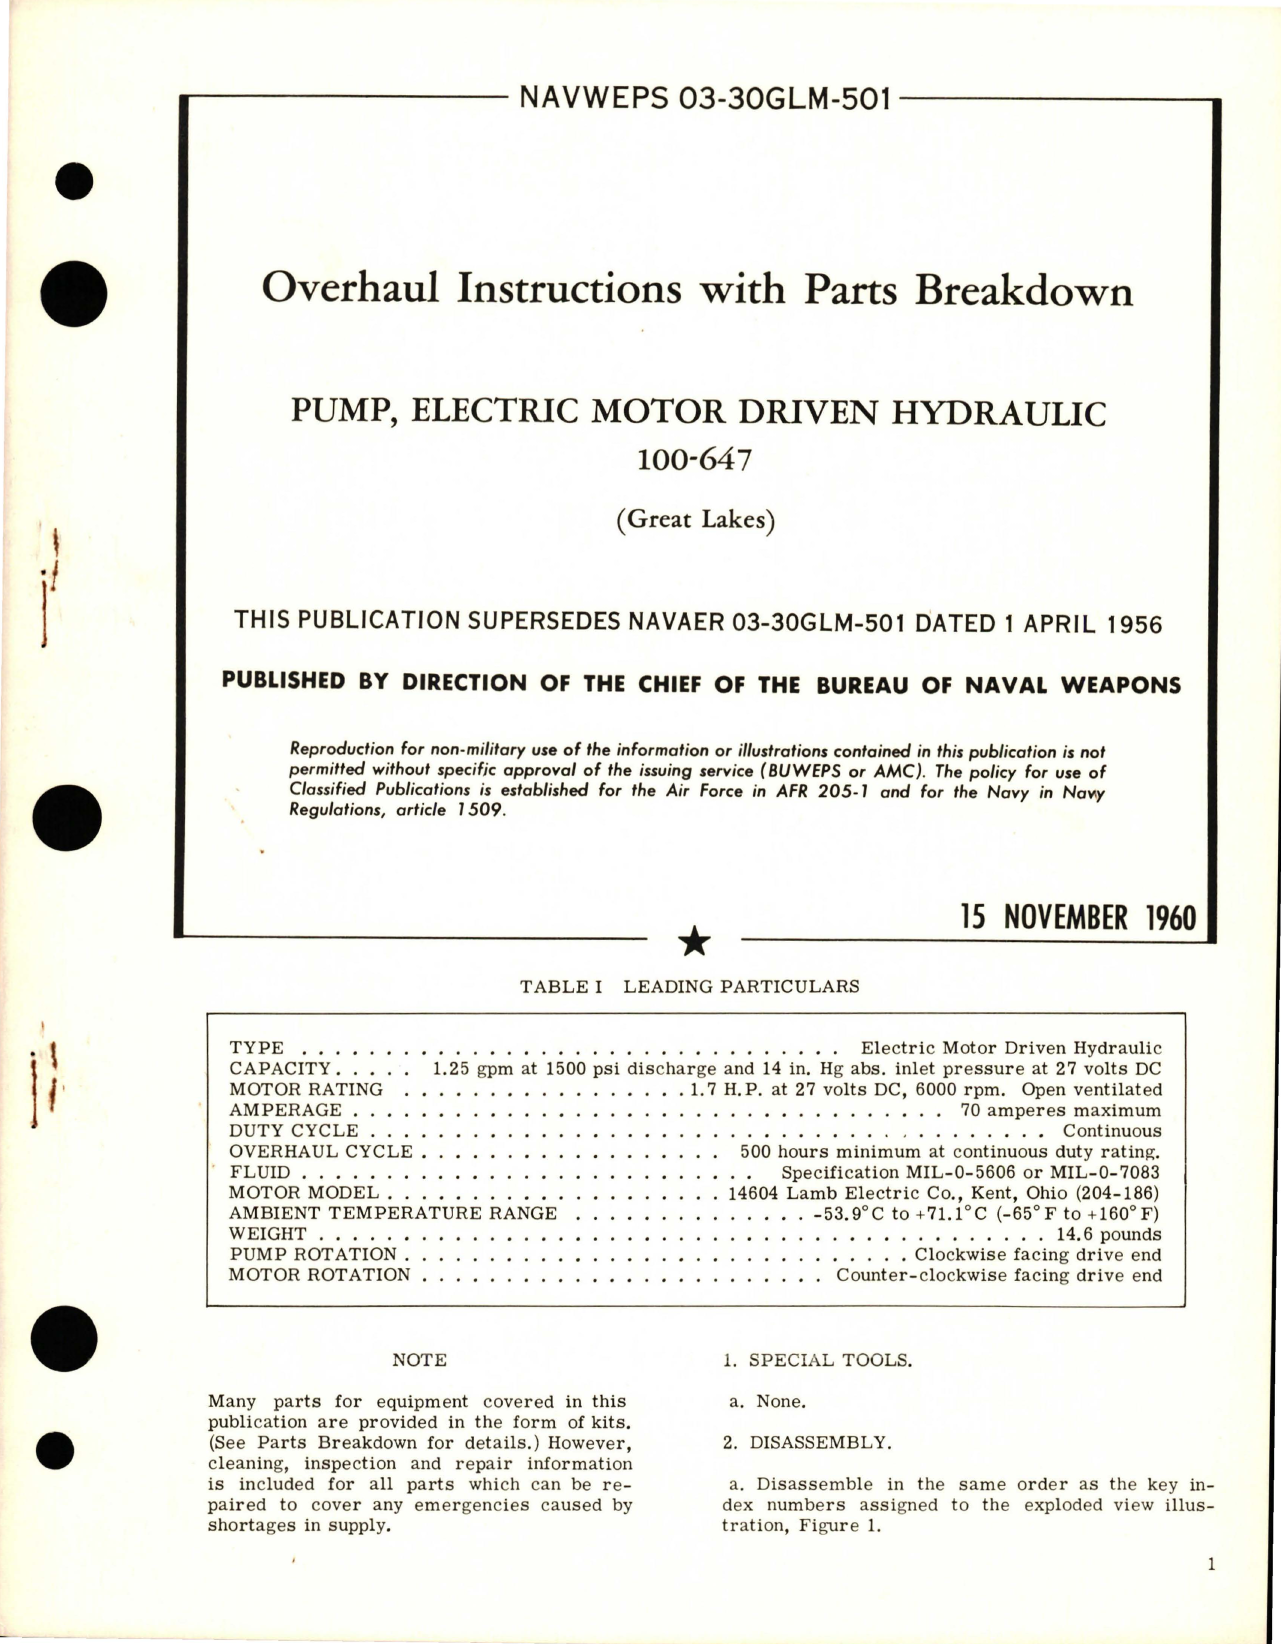 Sample page 1 from AirCorps Library document: Overhaul Instructions with Parts Breakdown for Electric Motor Driven Hydraulic Pump - 100-647